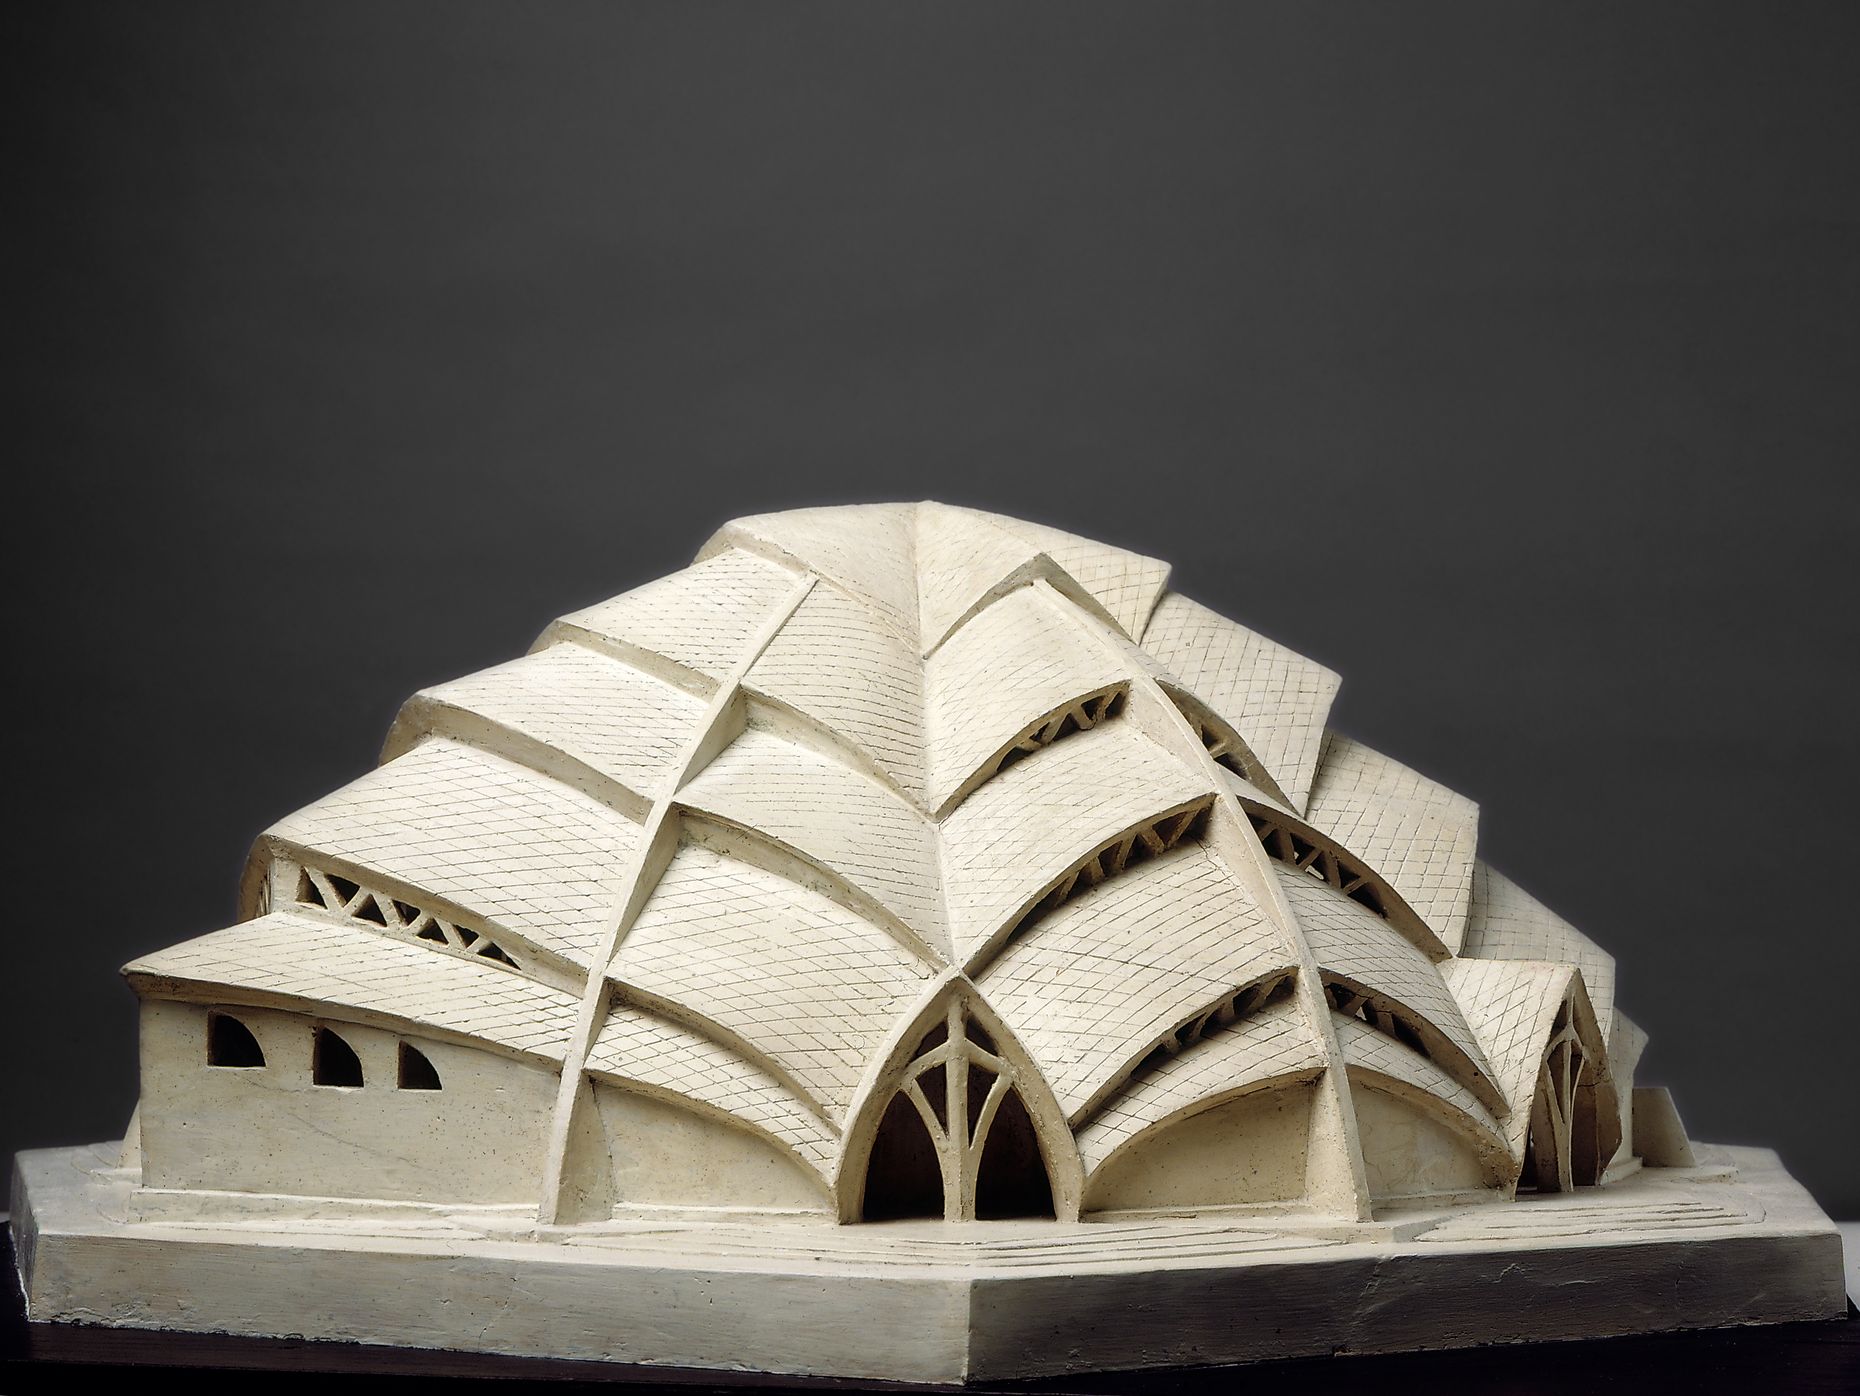 Architecture model by Otto Bartning, wood and plaster, 42,5 x 80 x 79 cm